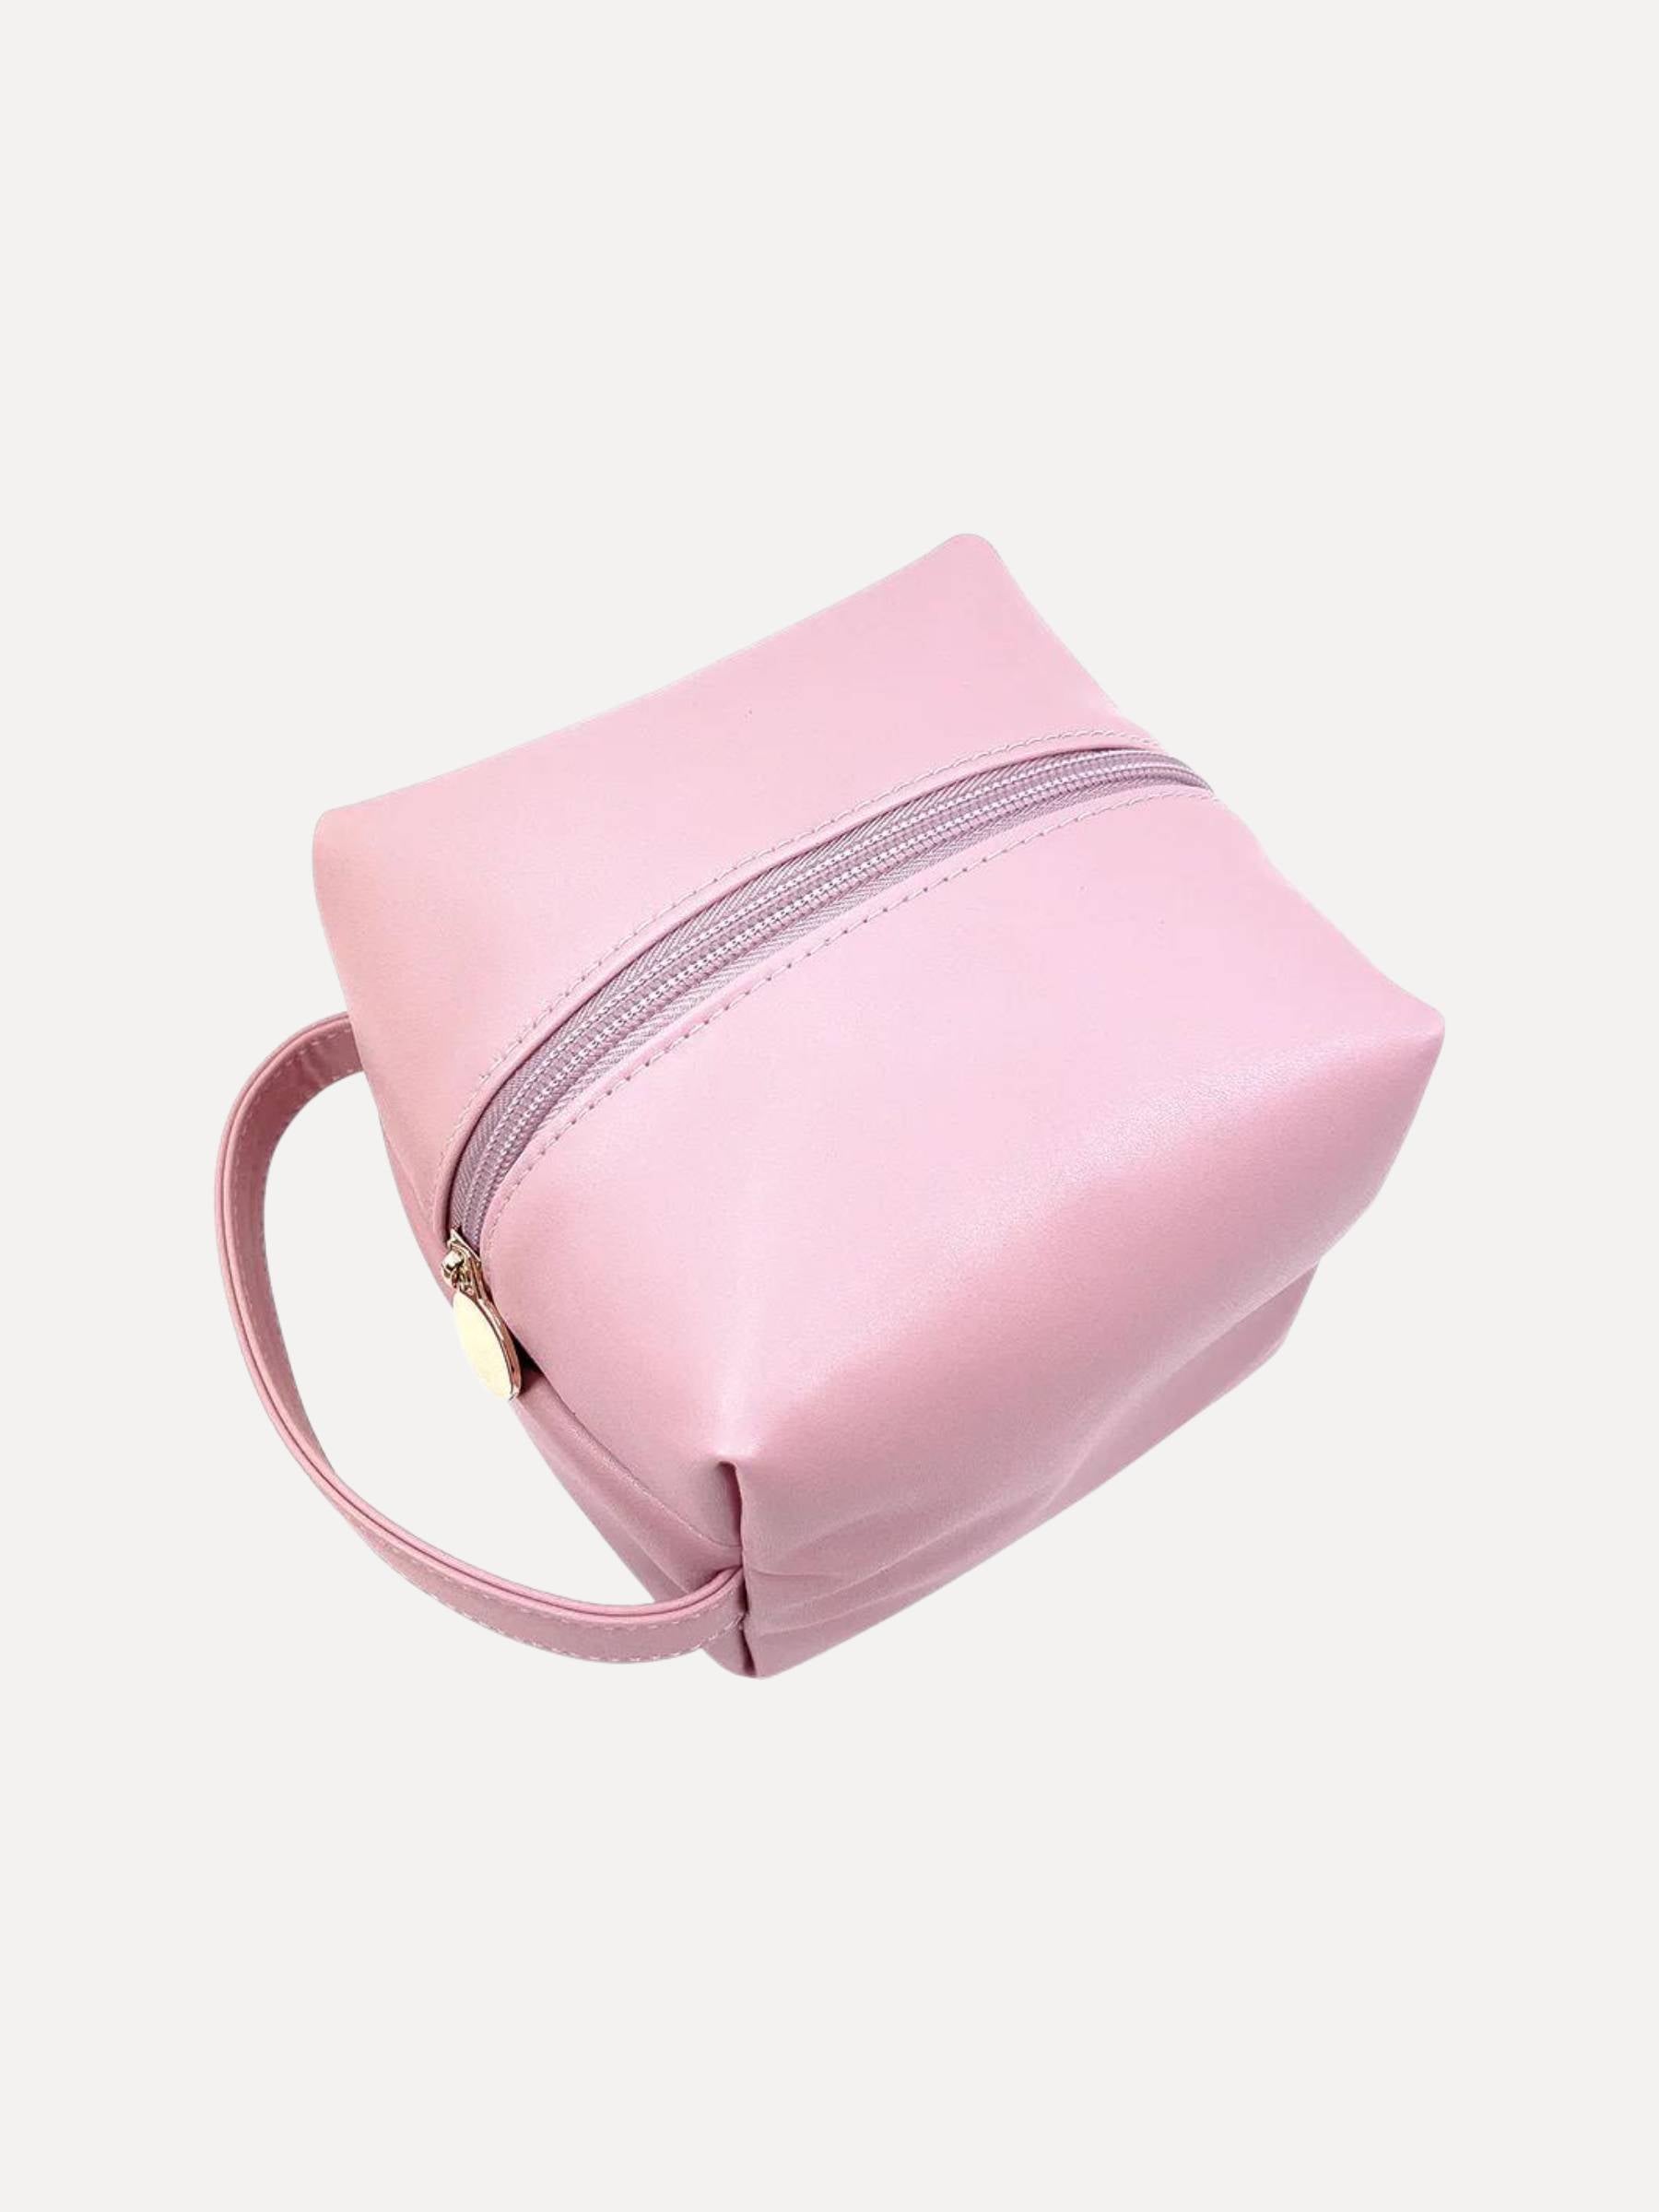 SUNNY Square Cosmetic Bag, Dusty Pink